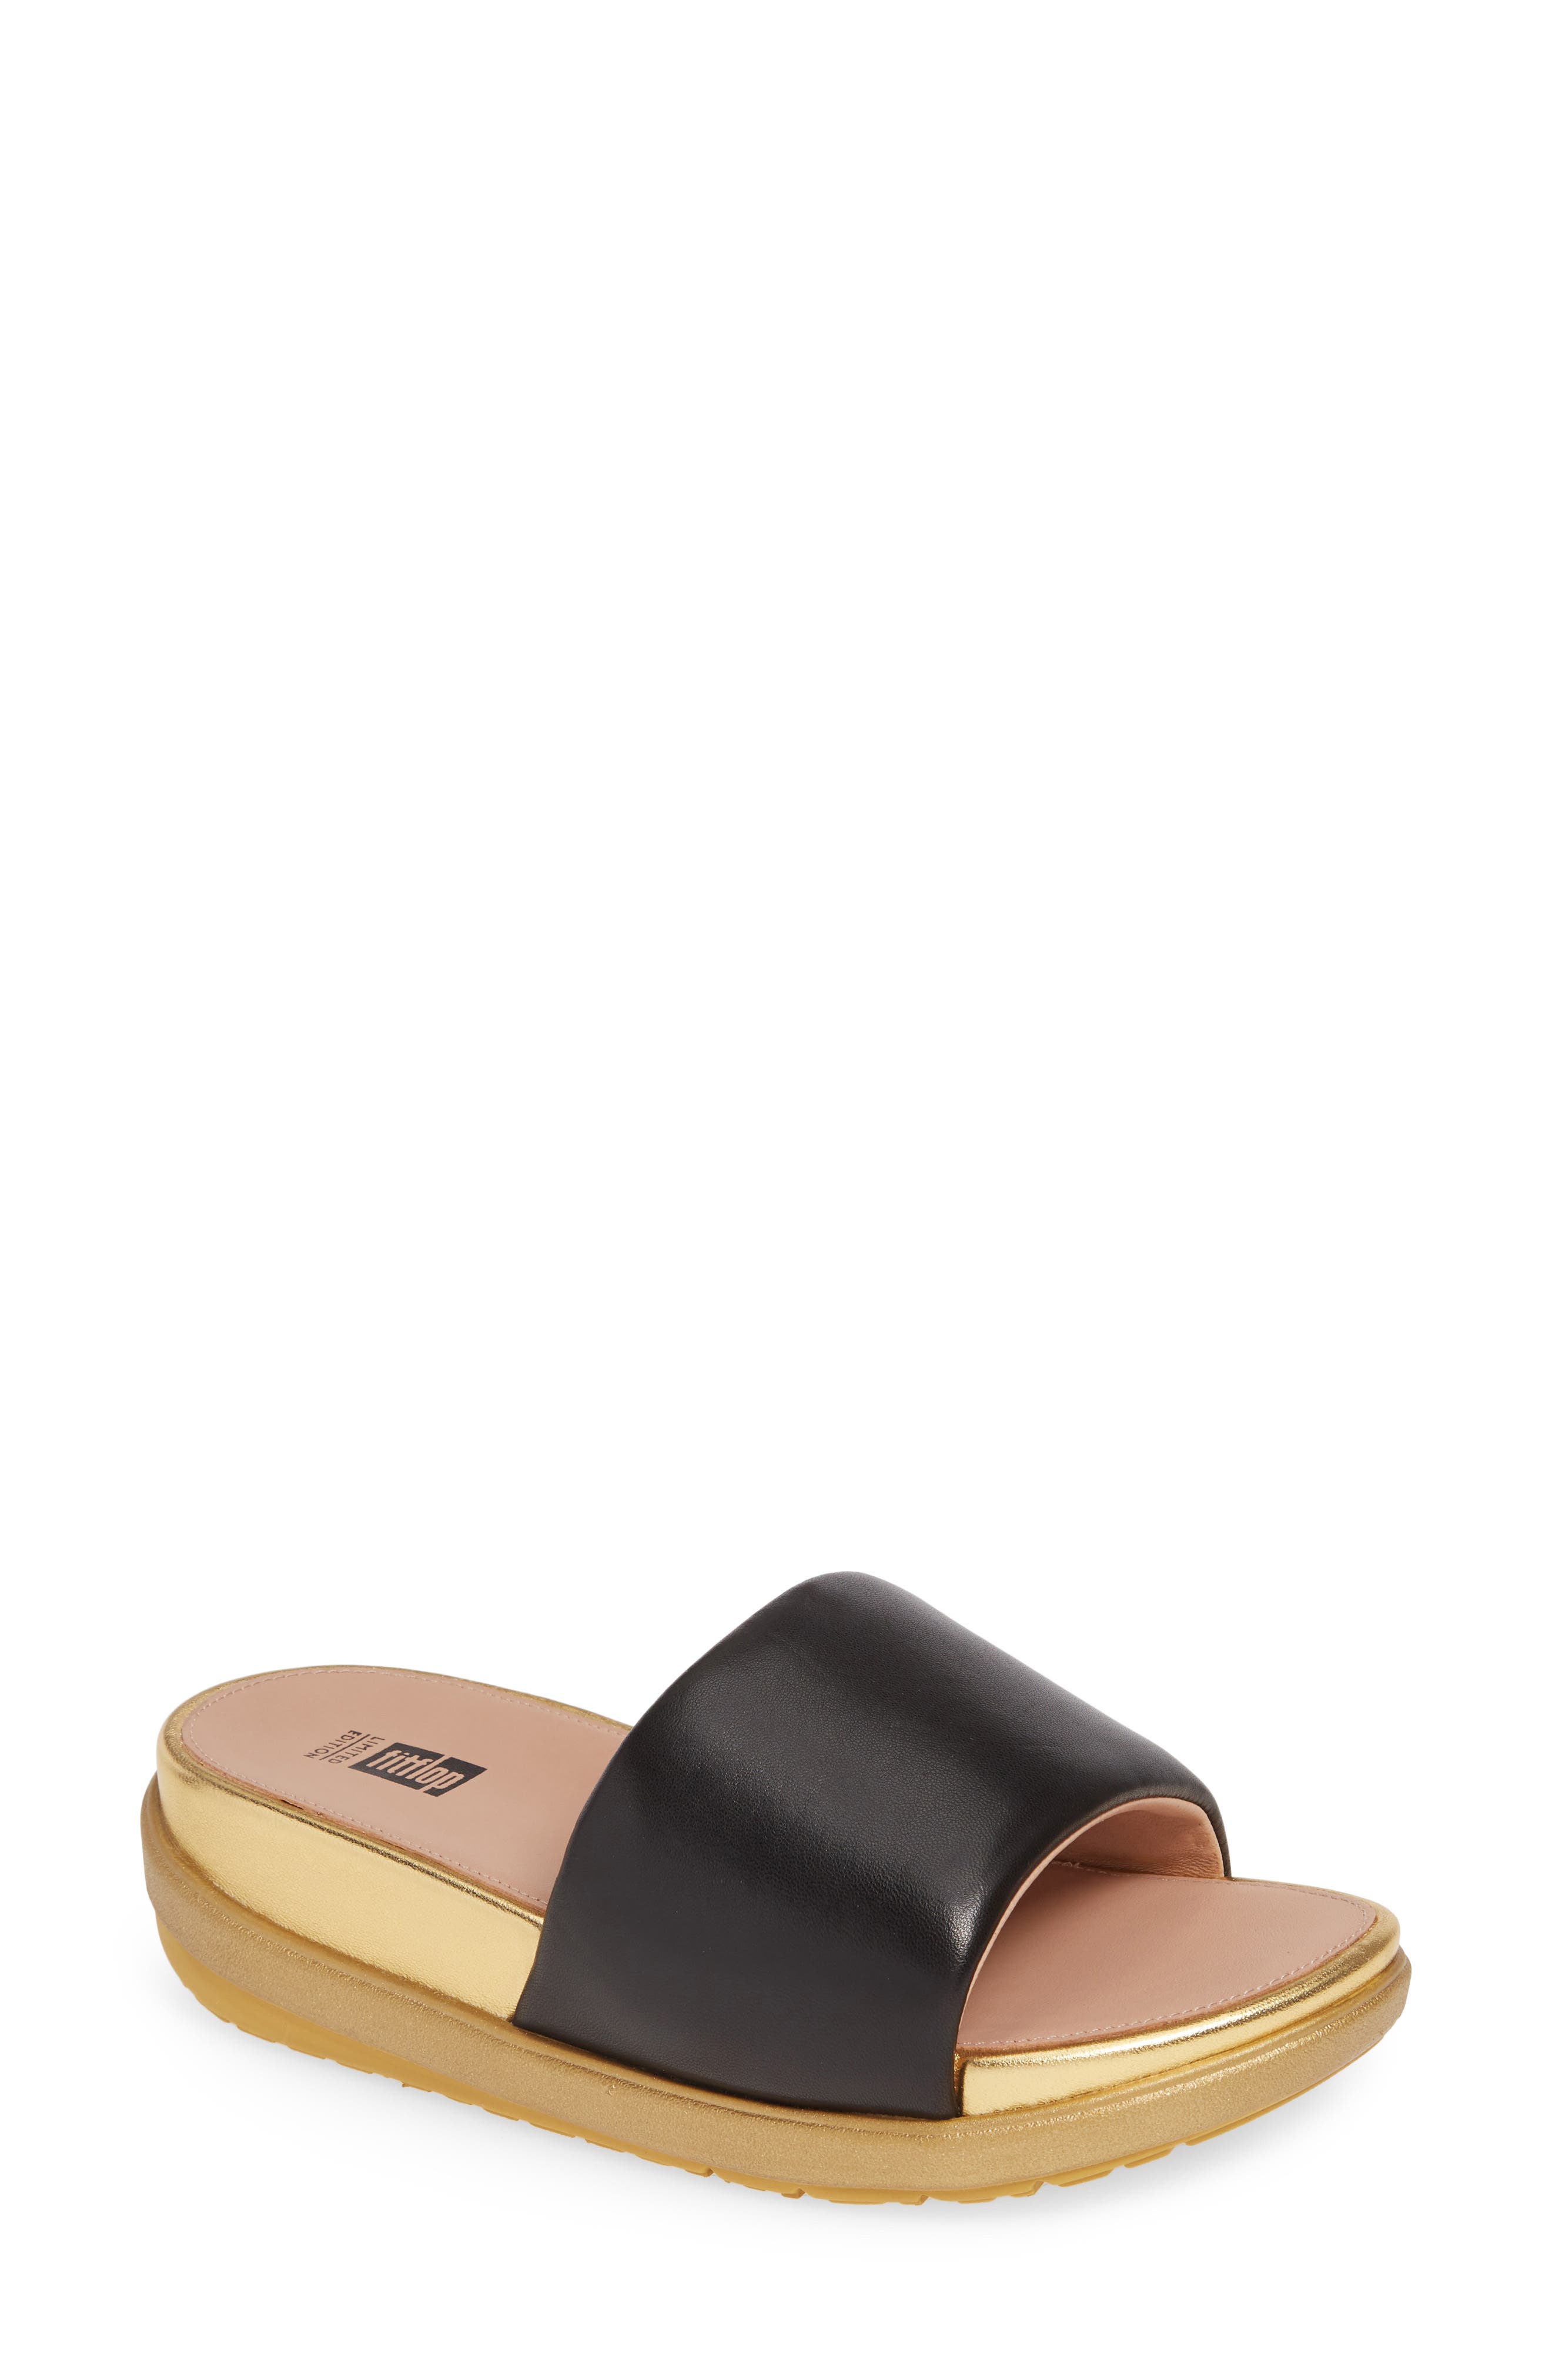 loosh luxe leather slides